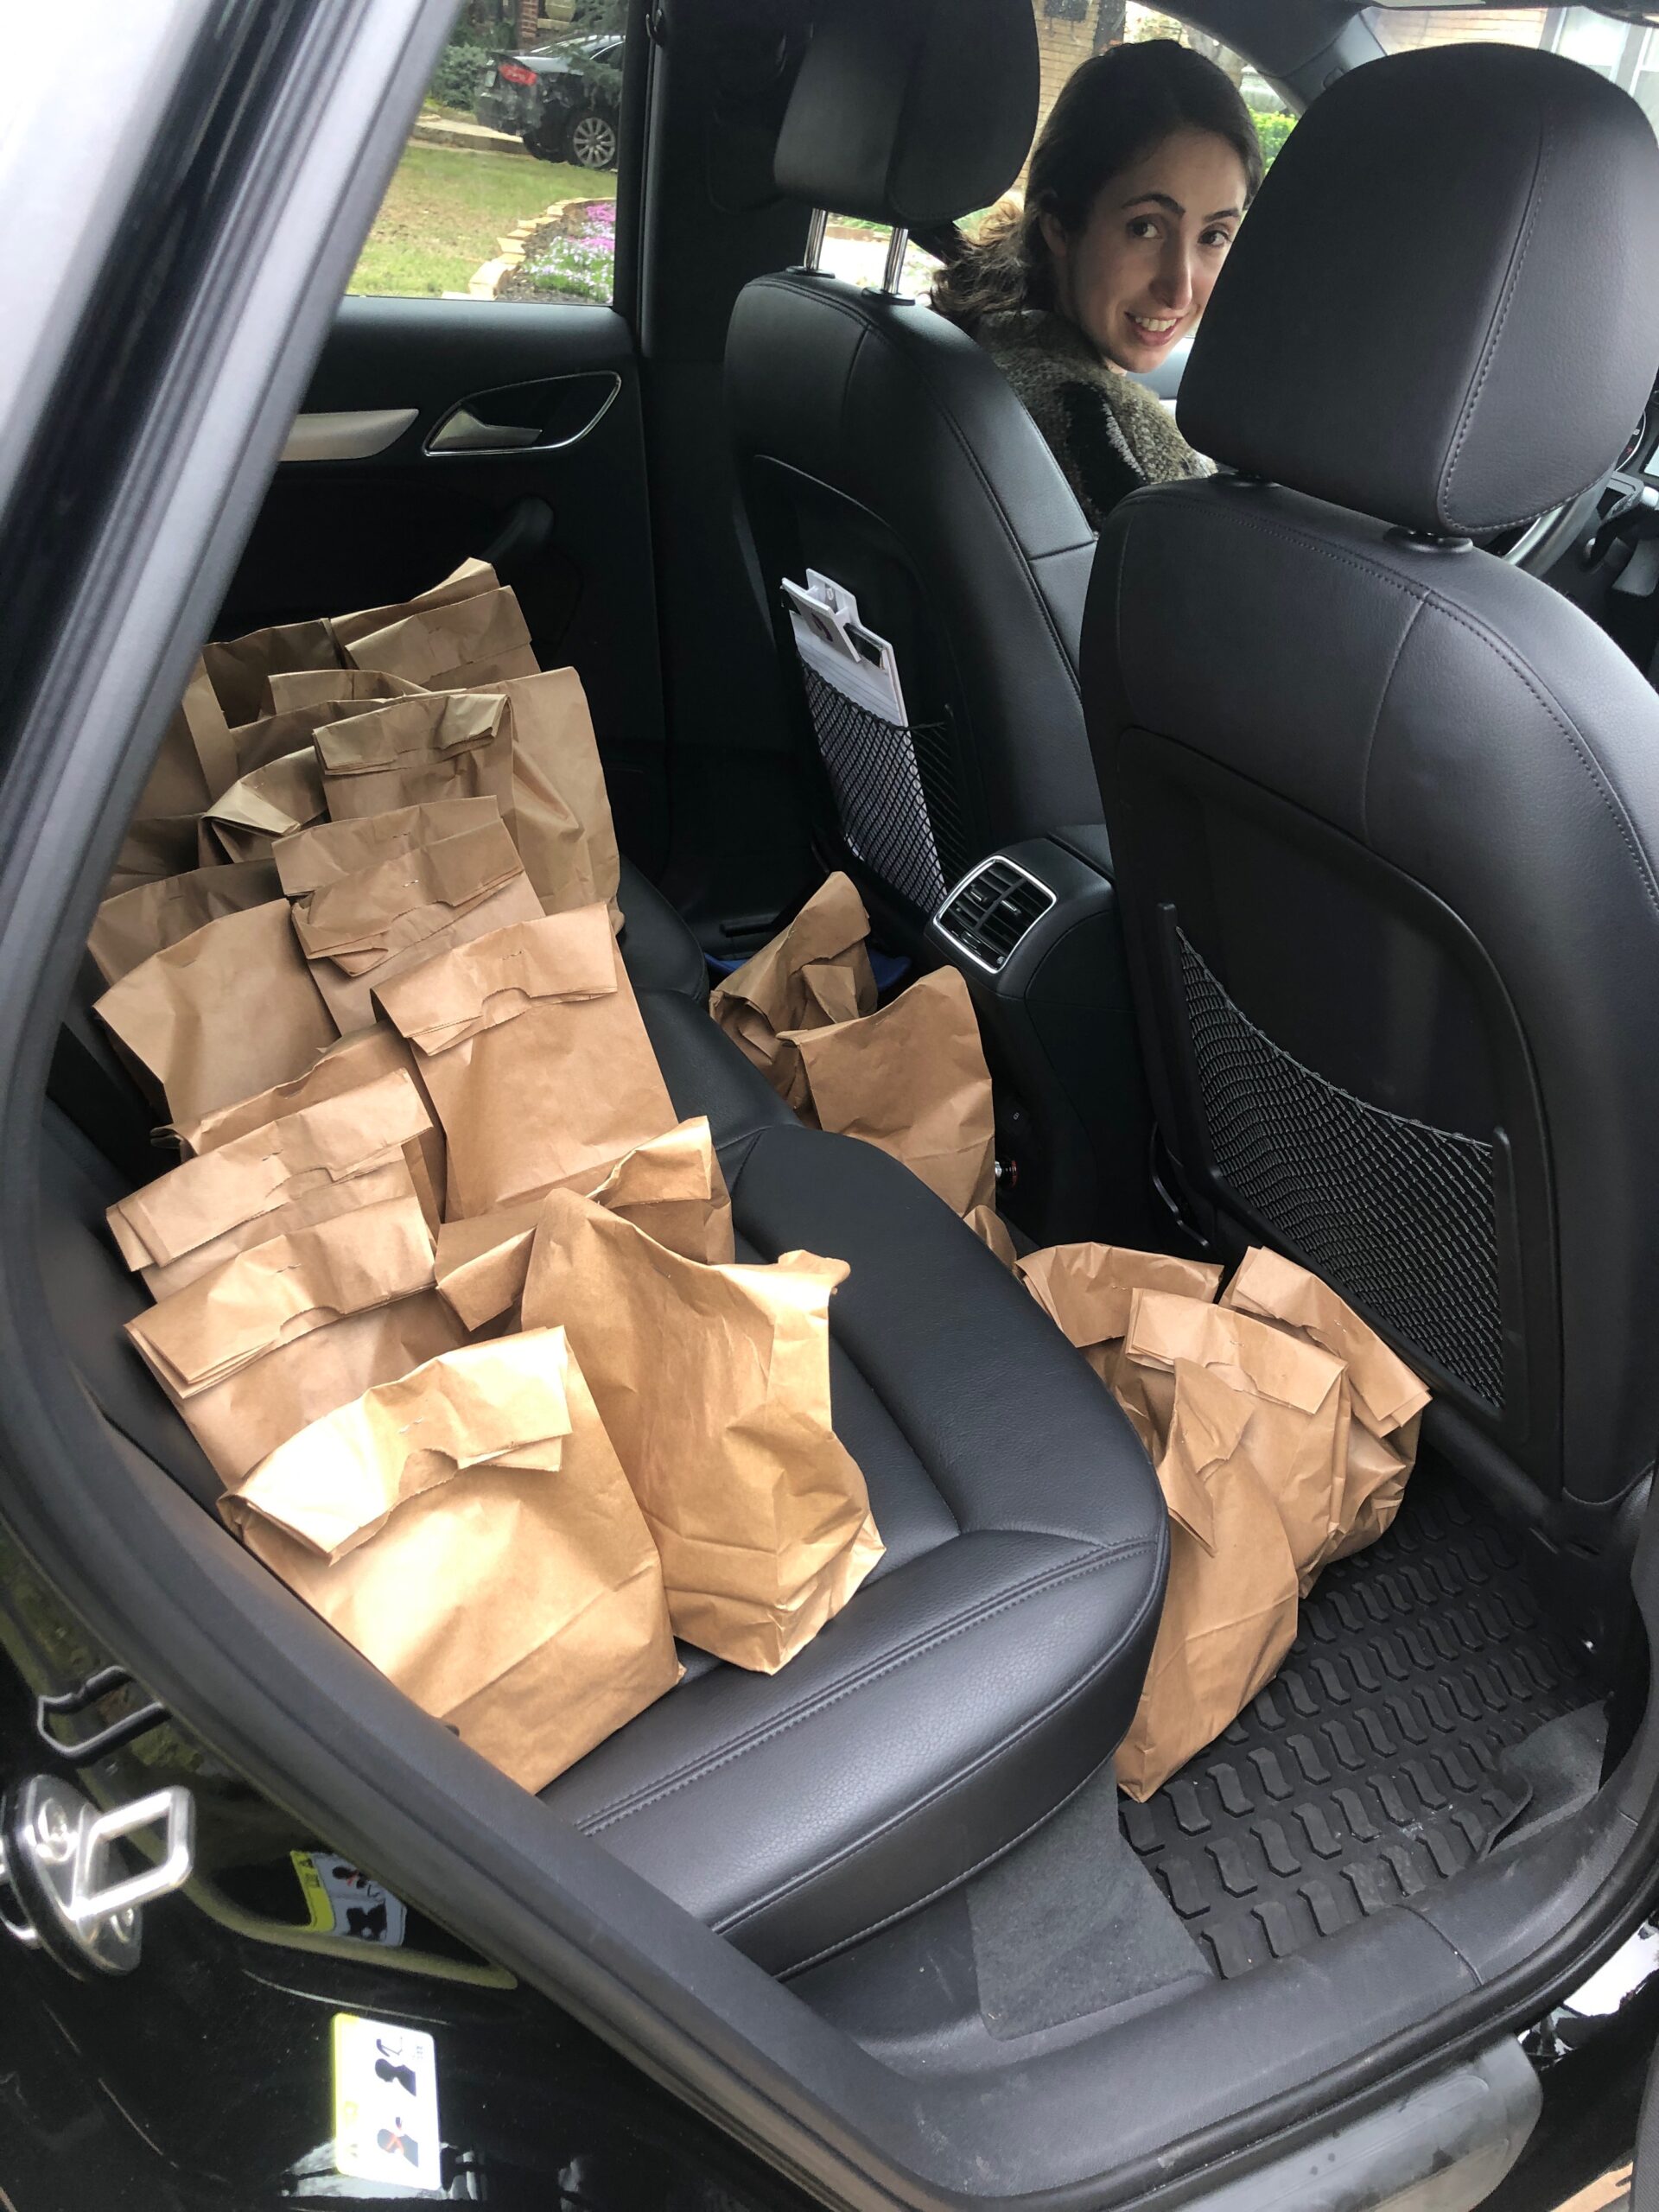 The back of a car full of paper bag sack lunches